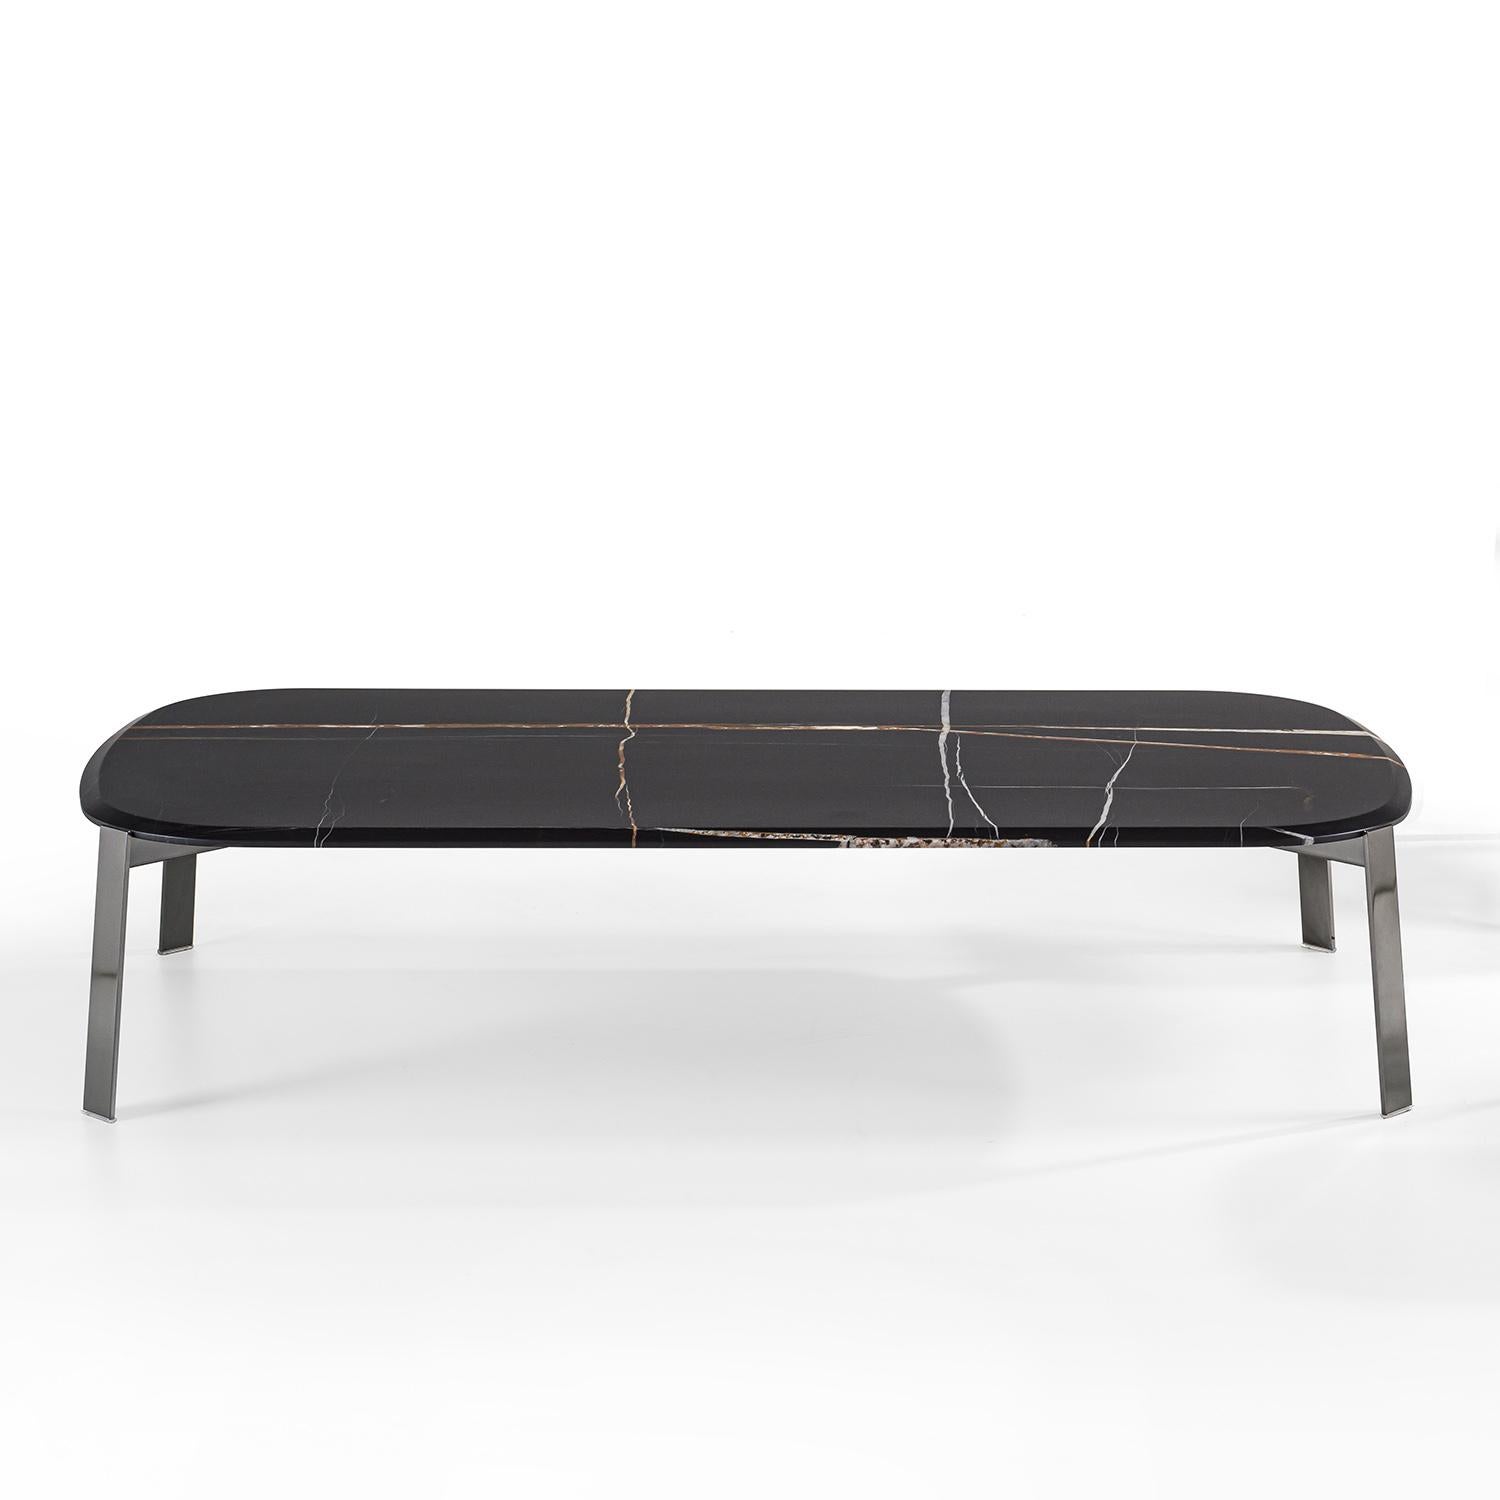 Coffee Table Peter Dark with chromed metal
structure and with black sahara marble top.
Also available with white calacatta marble or with
carnico grey marble top, on request.